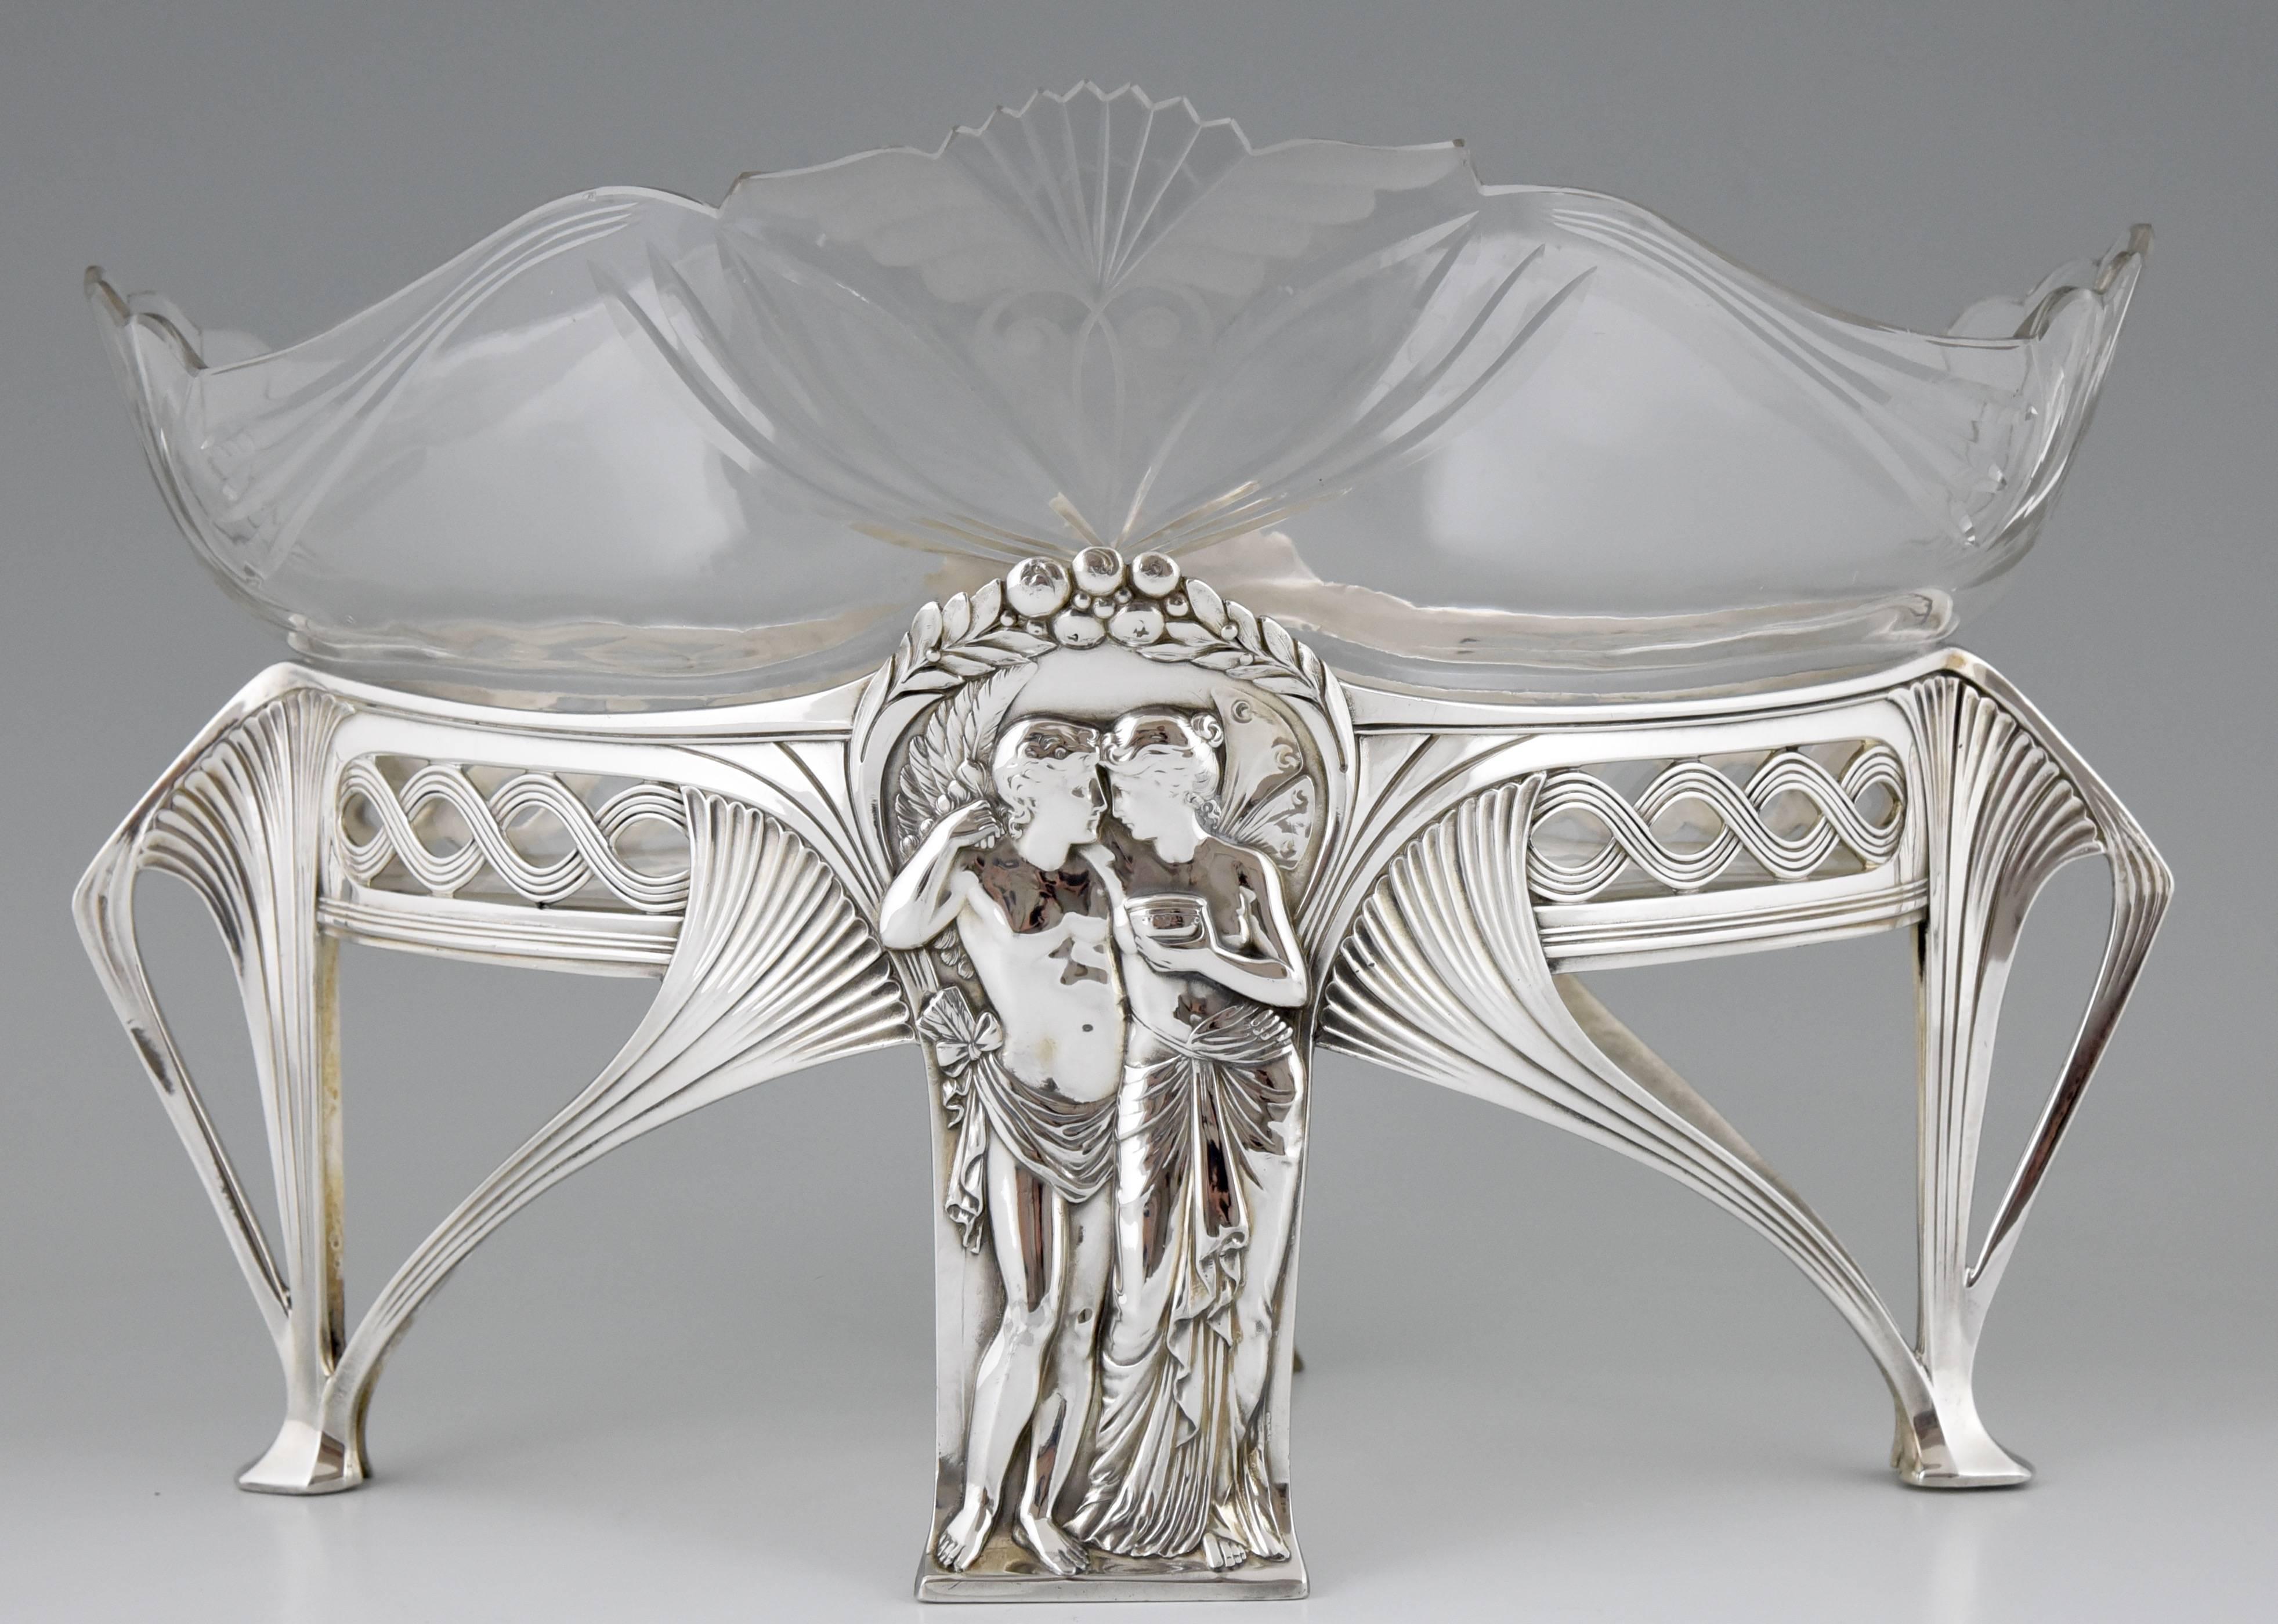 German Art Nouveau Silvered Flower Dish with Couple by WMF, 1906